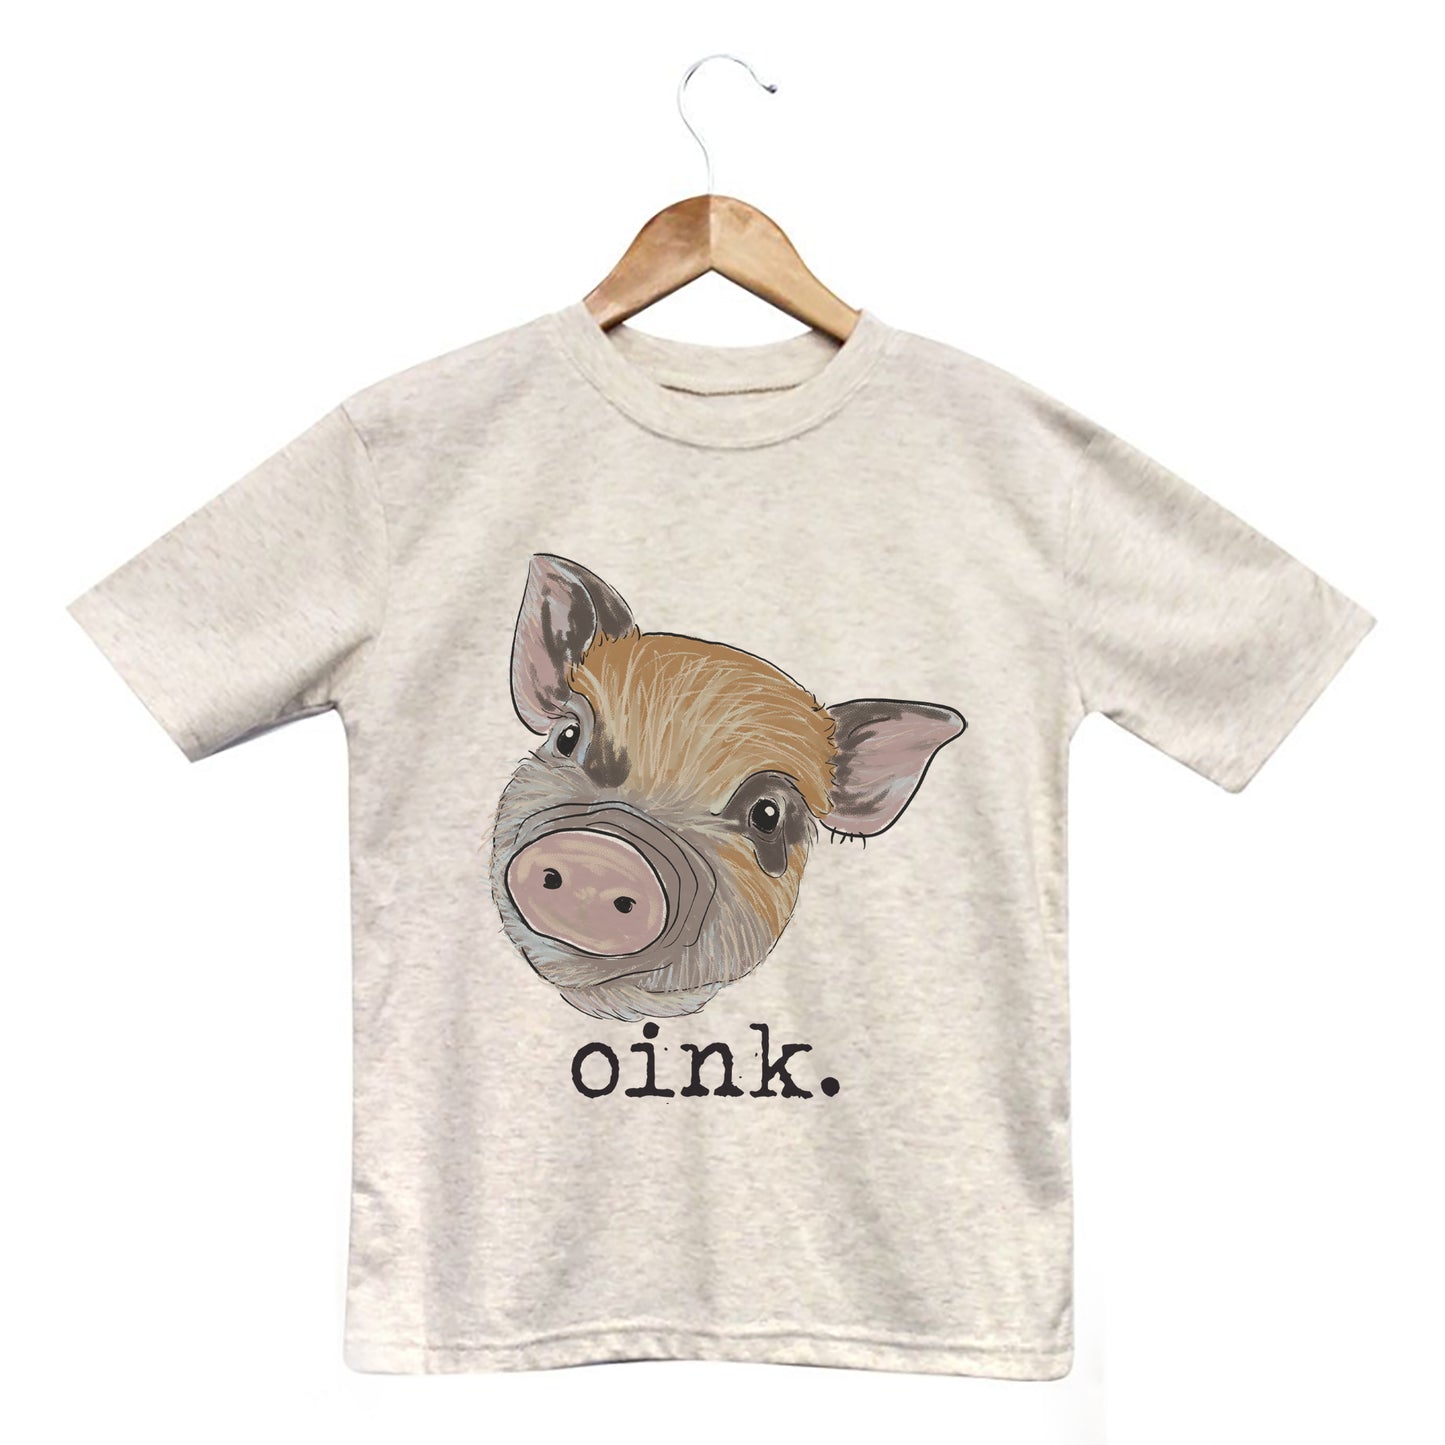 "Oink" pig Toddler/Youth Tee